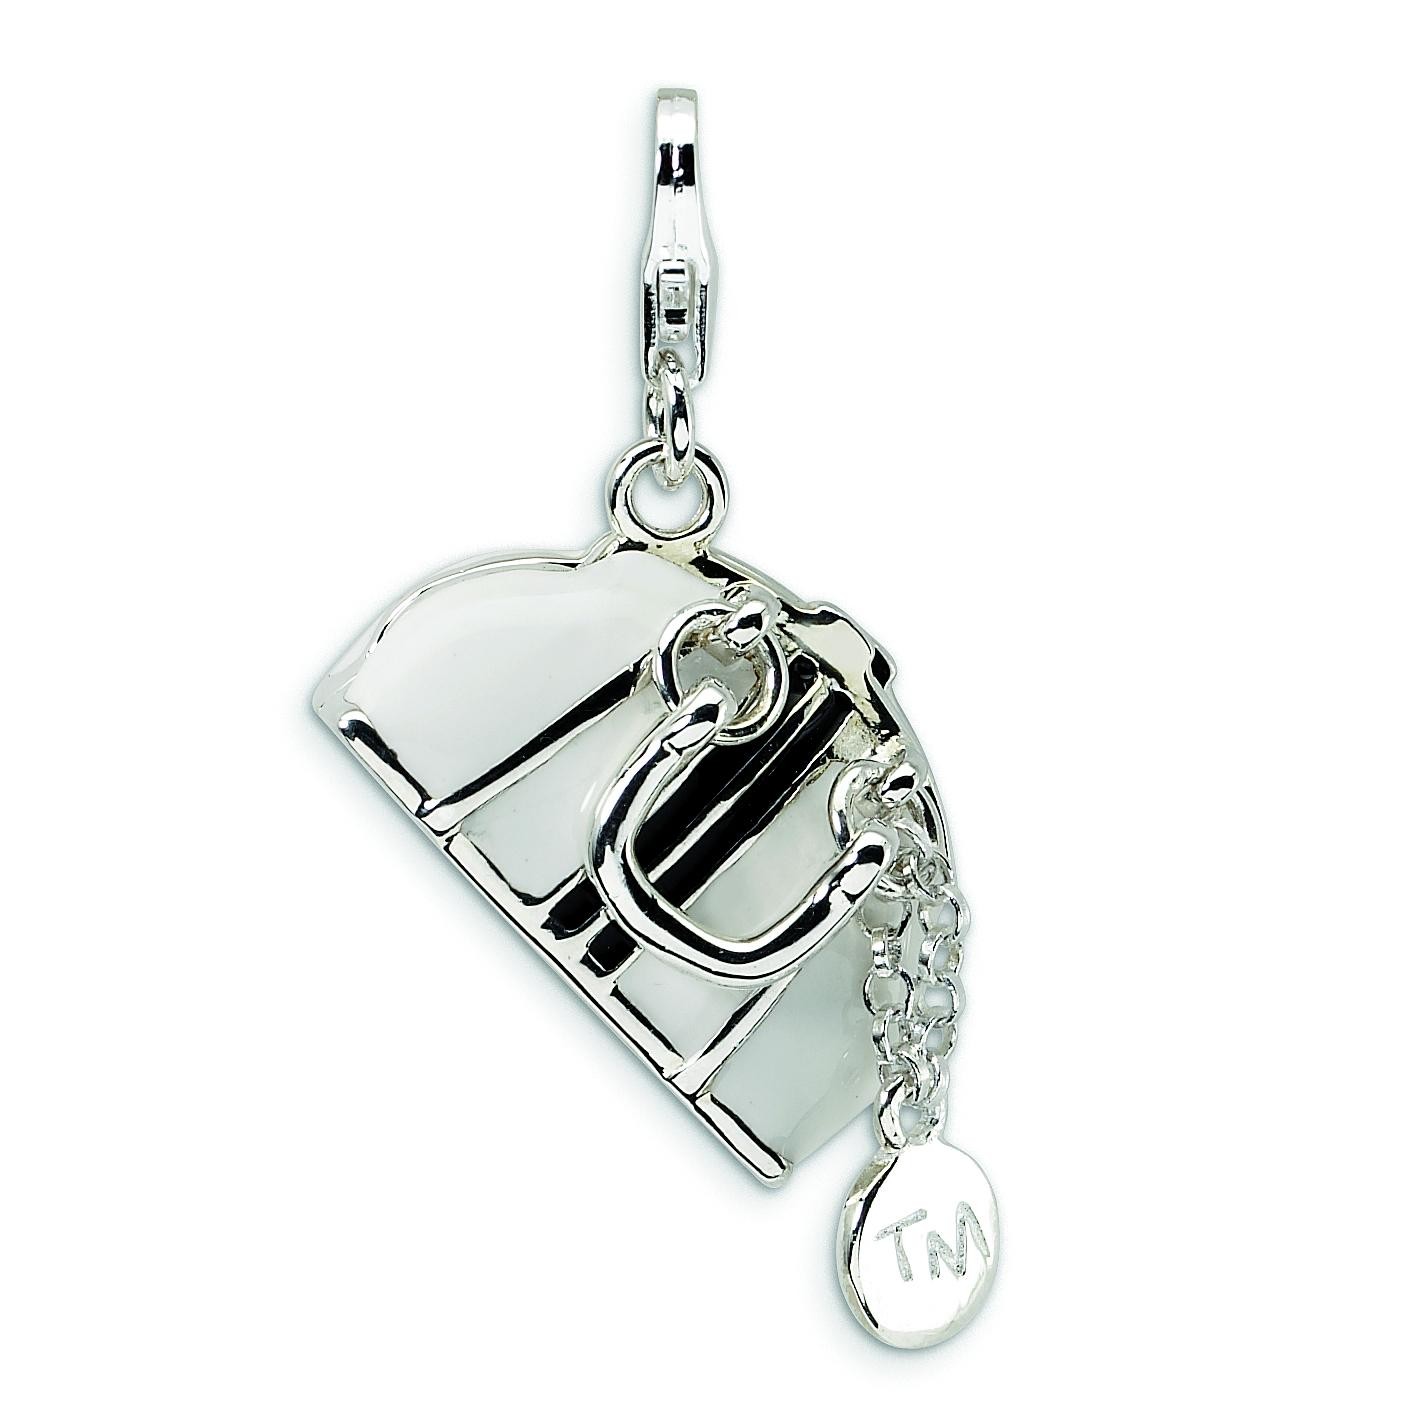 Purse Lobster Clasp Charm in Sterling Silver